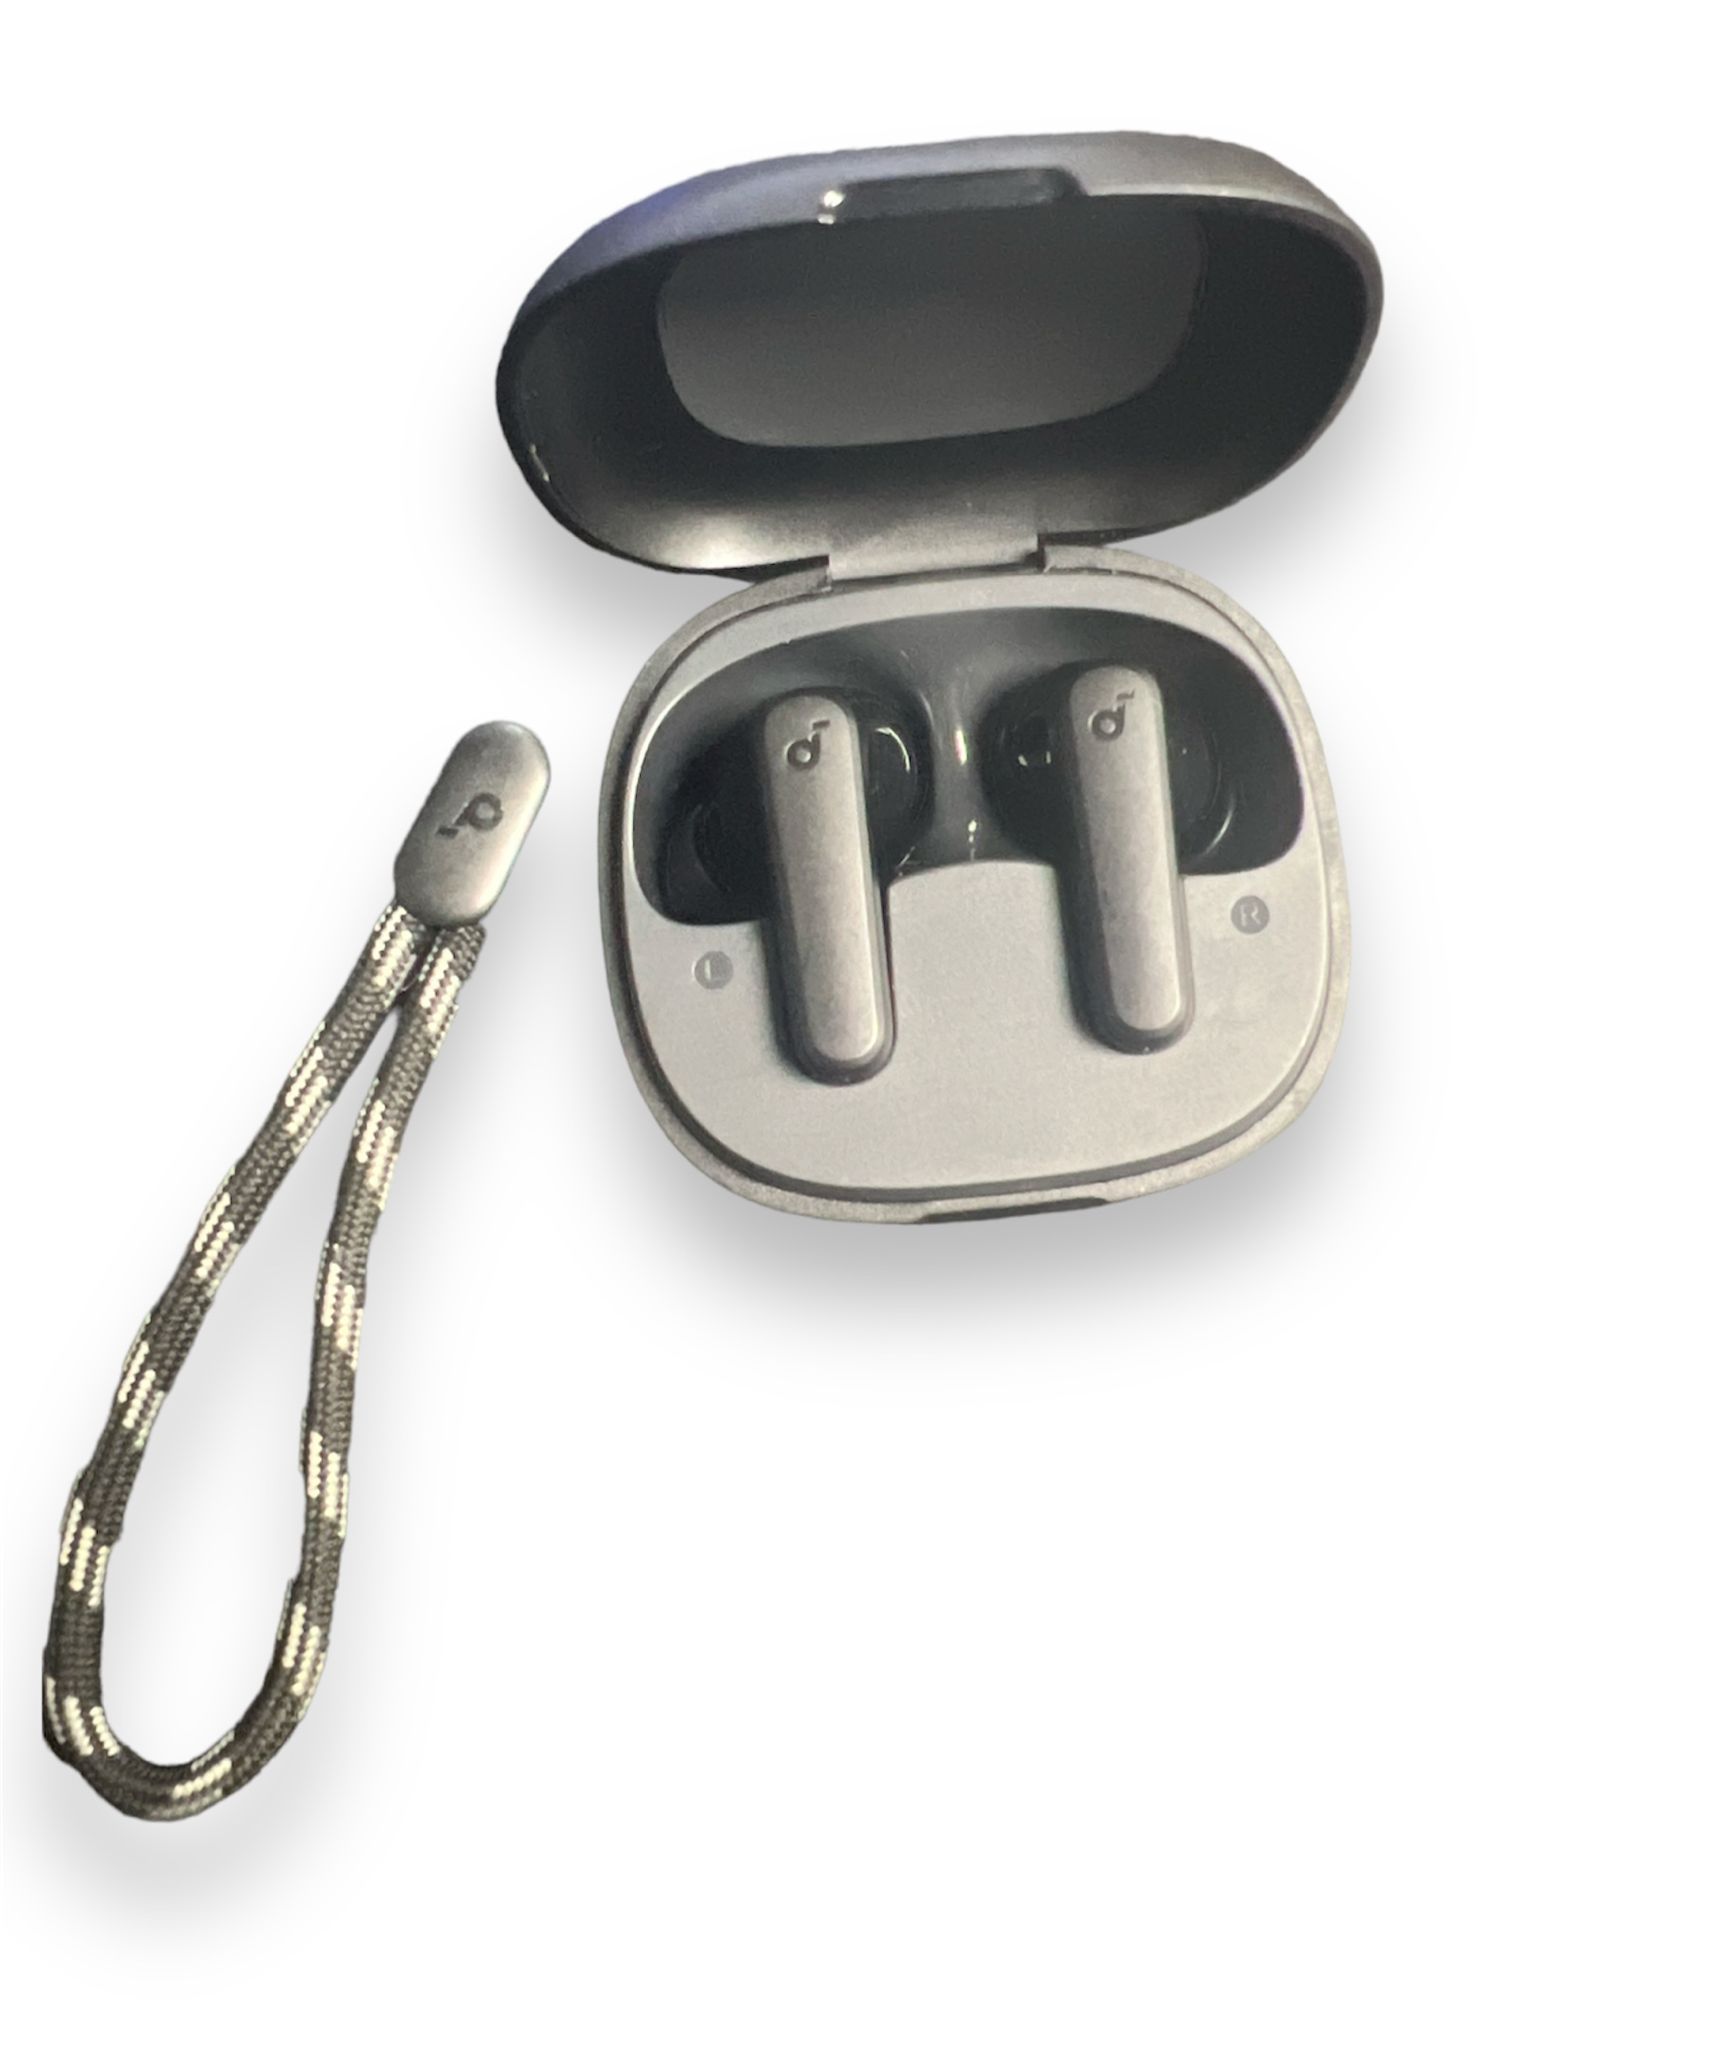 Soundcore p20i earbuds